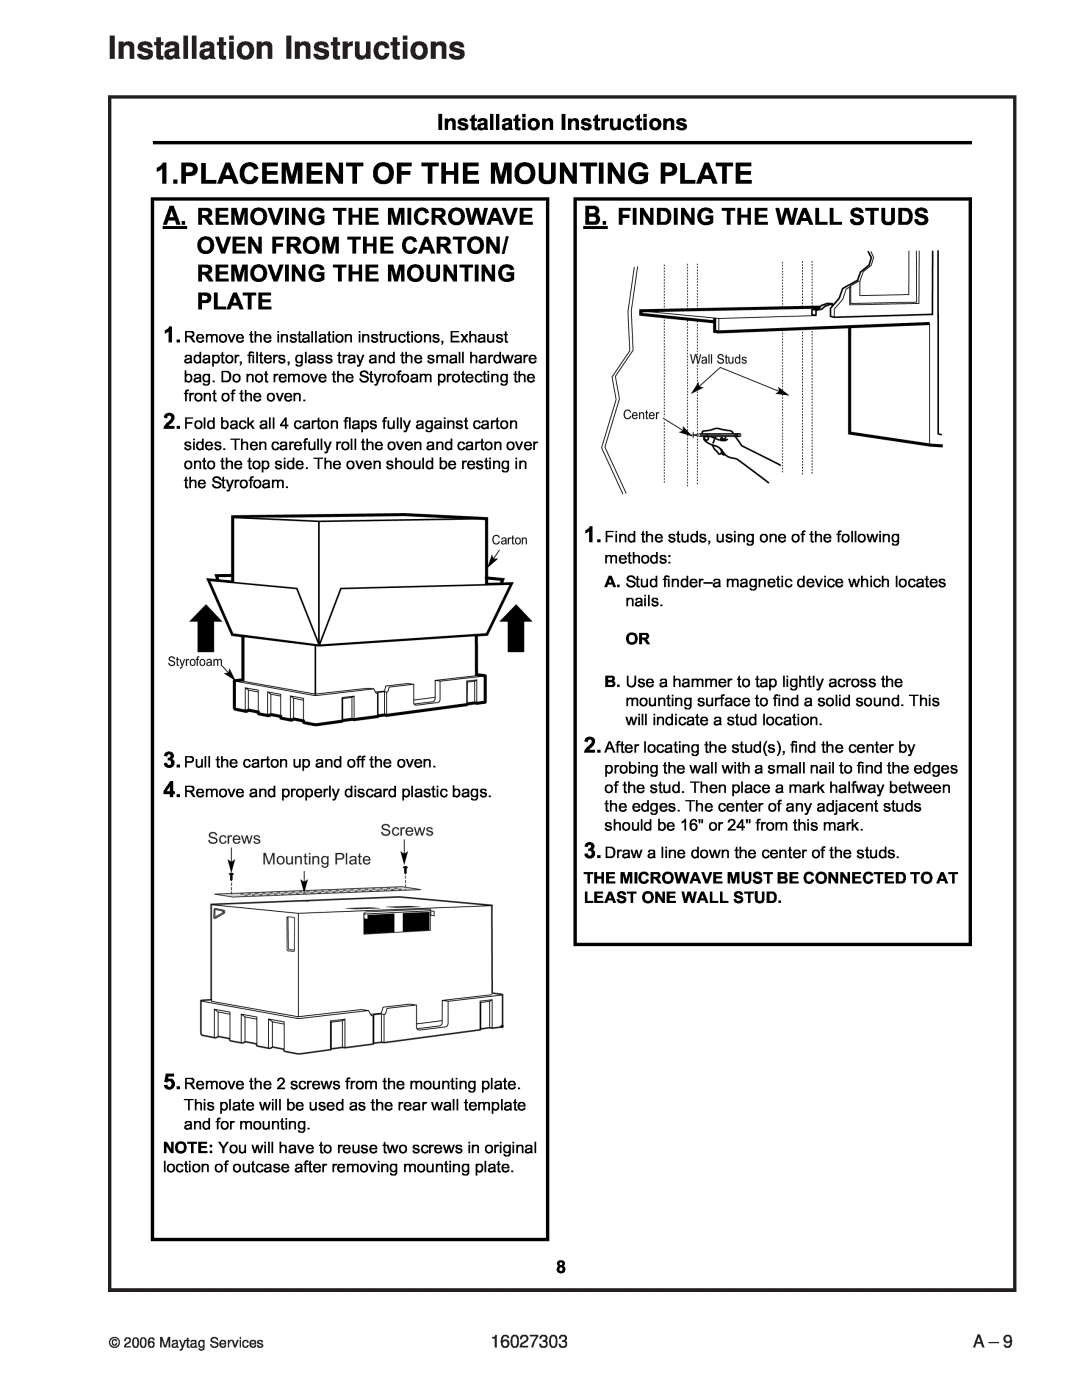 Maytag UMV1152CA manual Placement Of The Mounting Plate, B.Finding The Wall Studs, Installation Instructions 